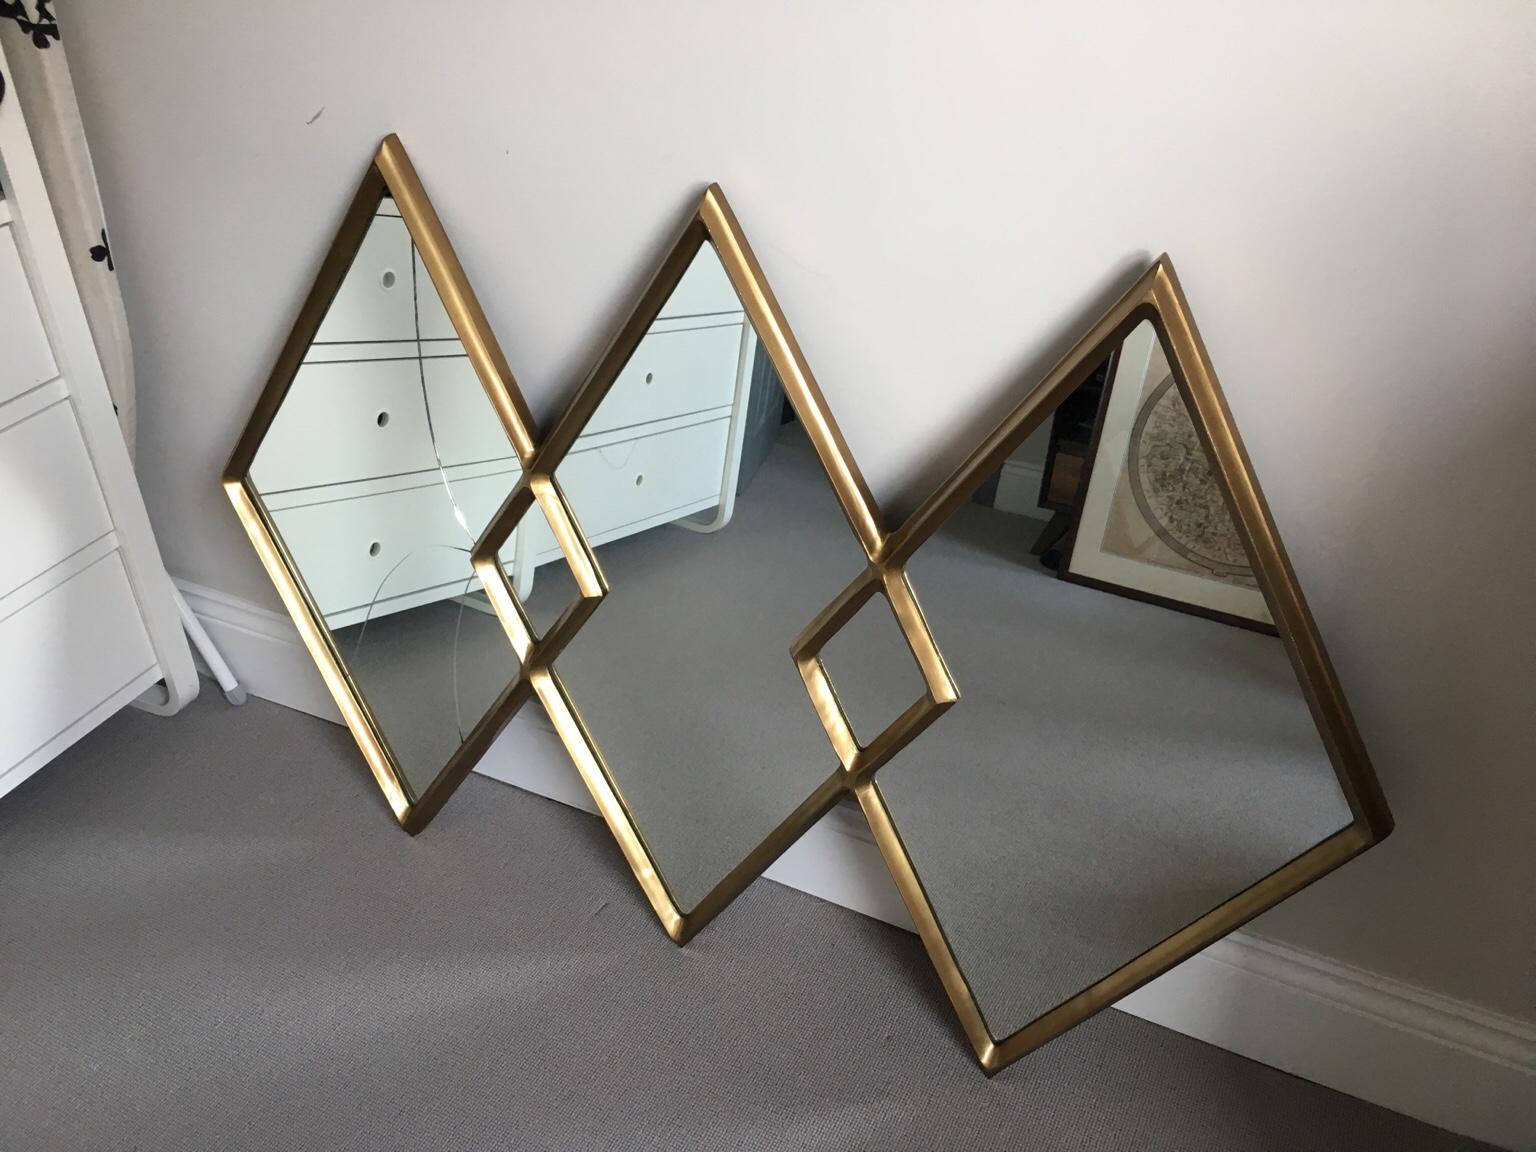 West Elm Gold Diamond Mirror in E8 Hackney for £50.00 for sale | Shpock